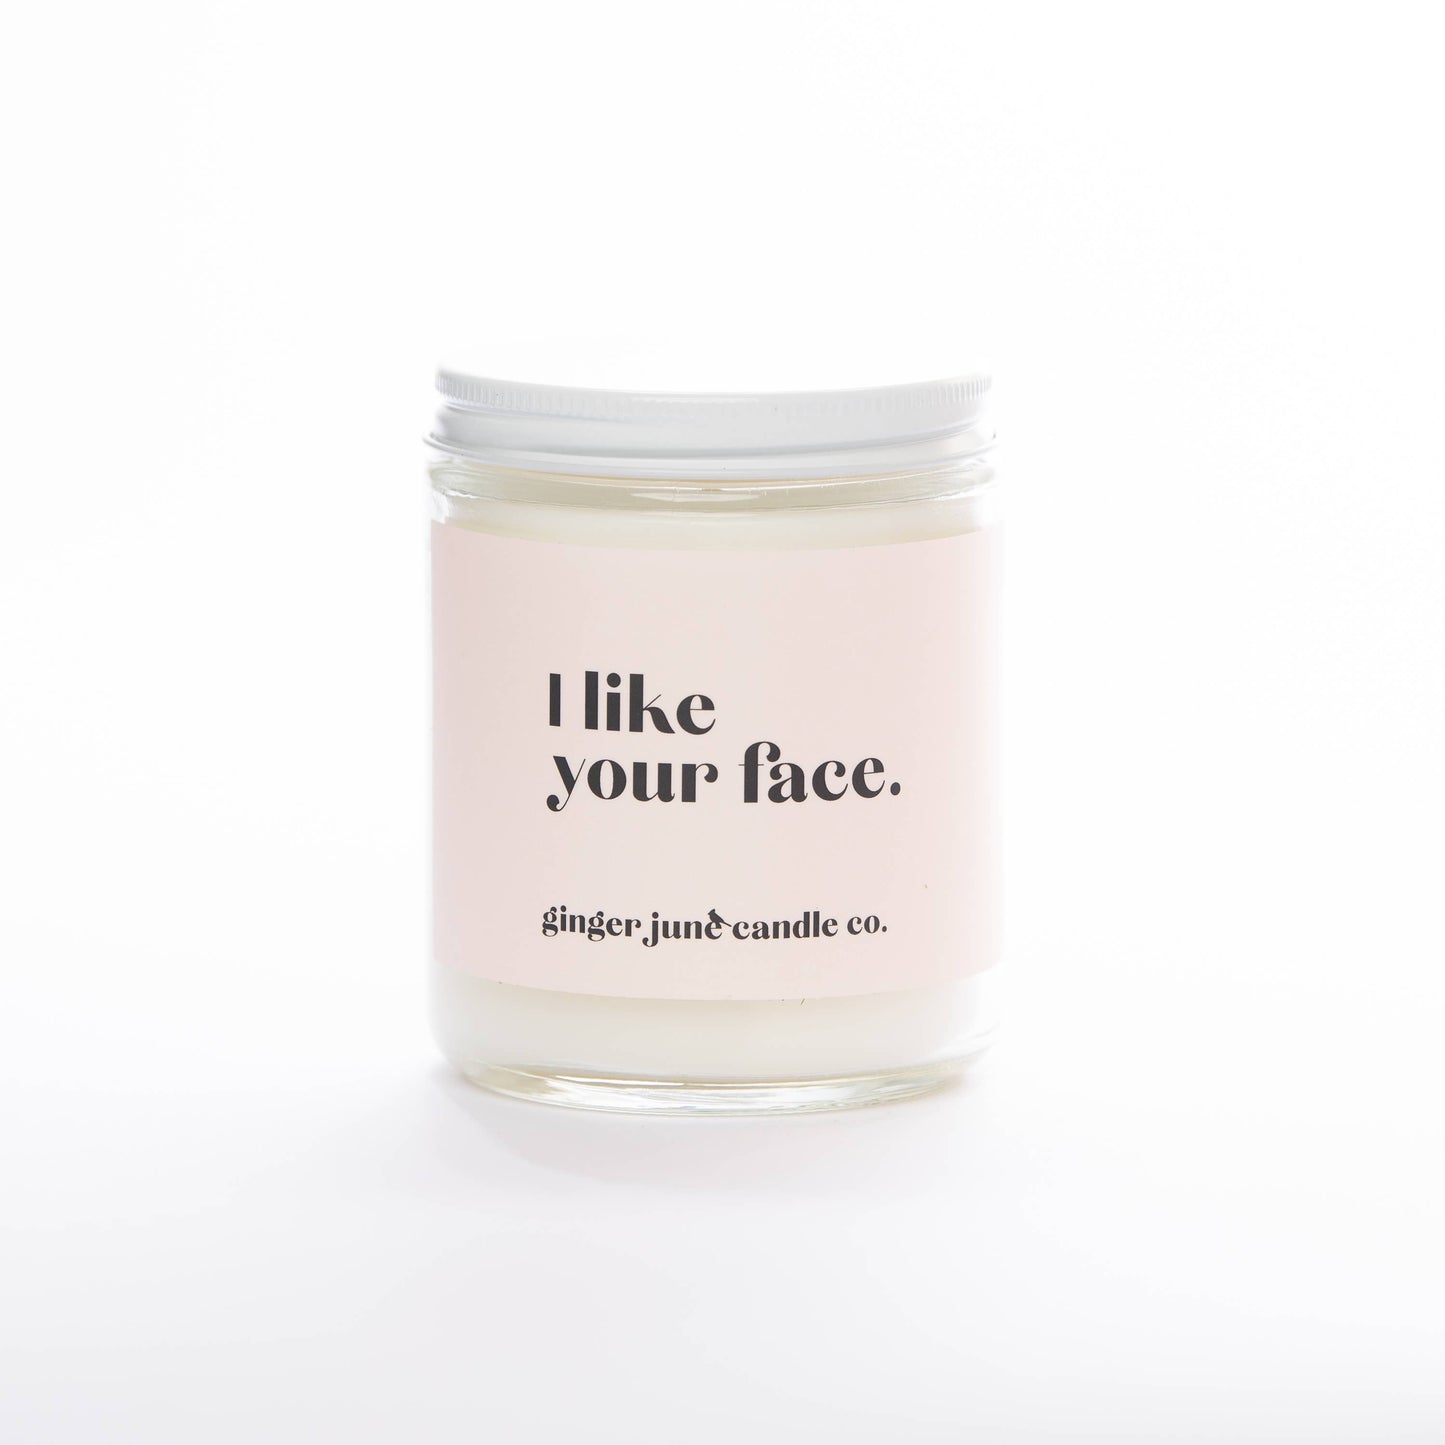 I LIKE YOUR FACE • NON TOXIC SOY CANDLE